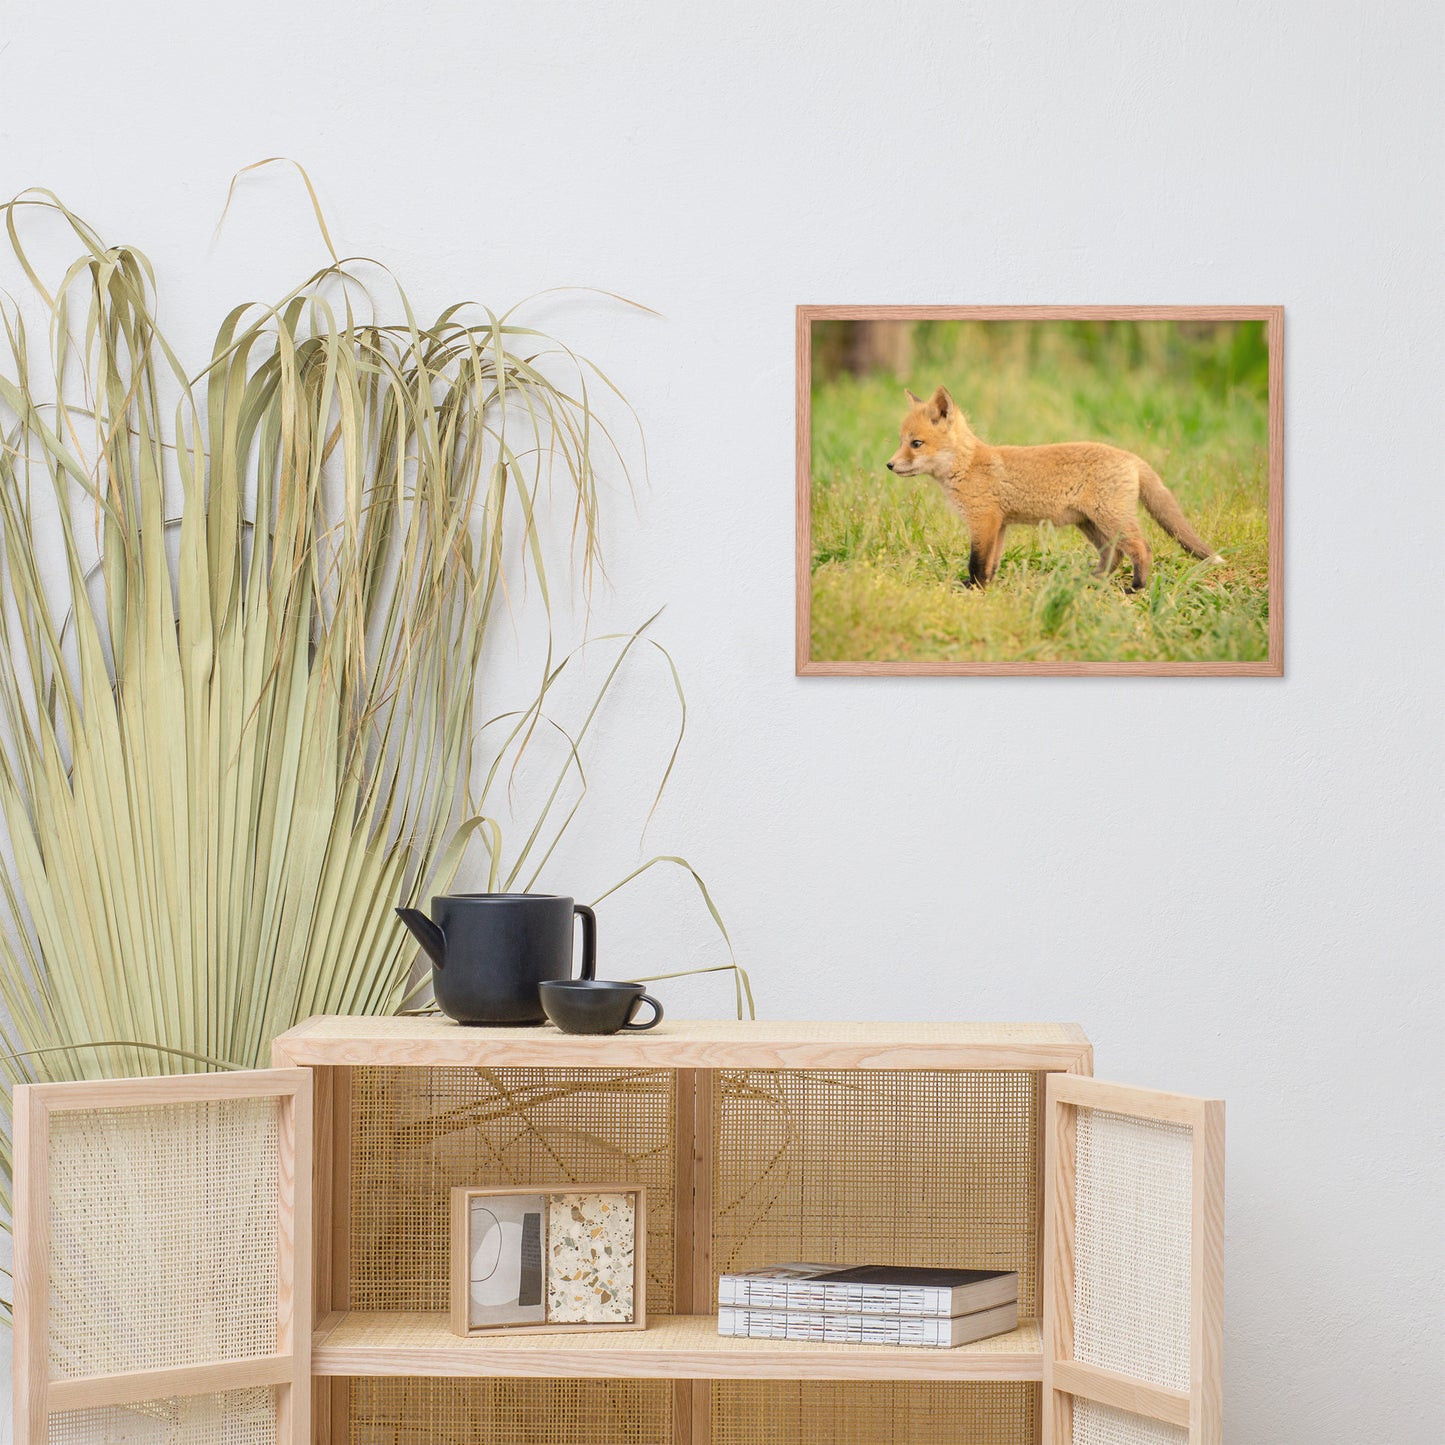 Nursery Prints Neutral: Baby Fox Pup In Meadow/ Animal / Wildlife / Nature Photographic Artwork - Framed Artwork - Wall Decor